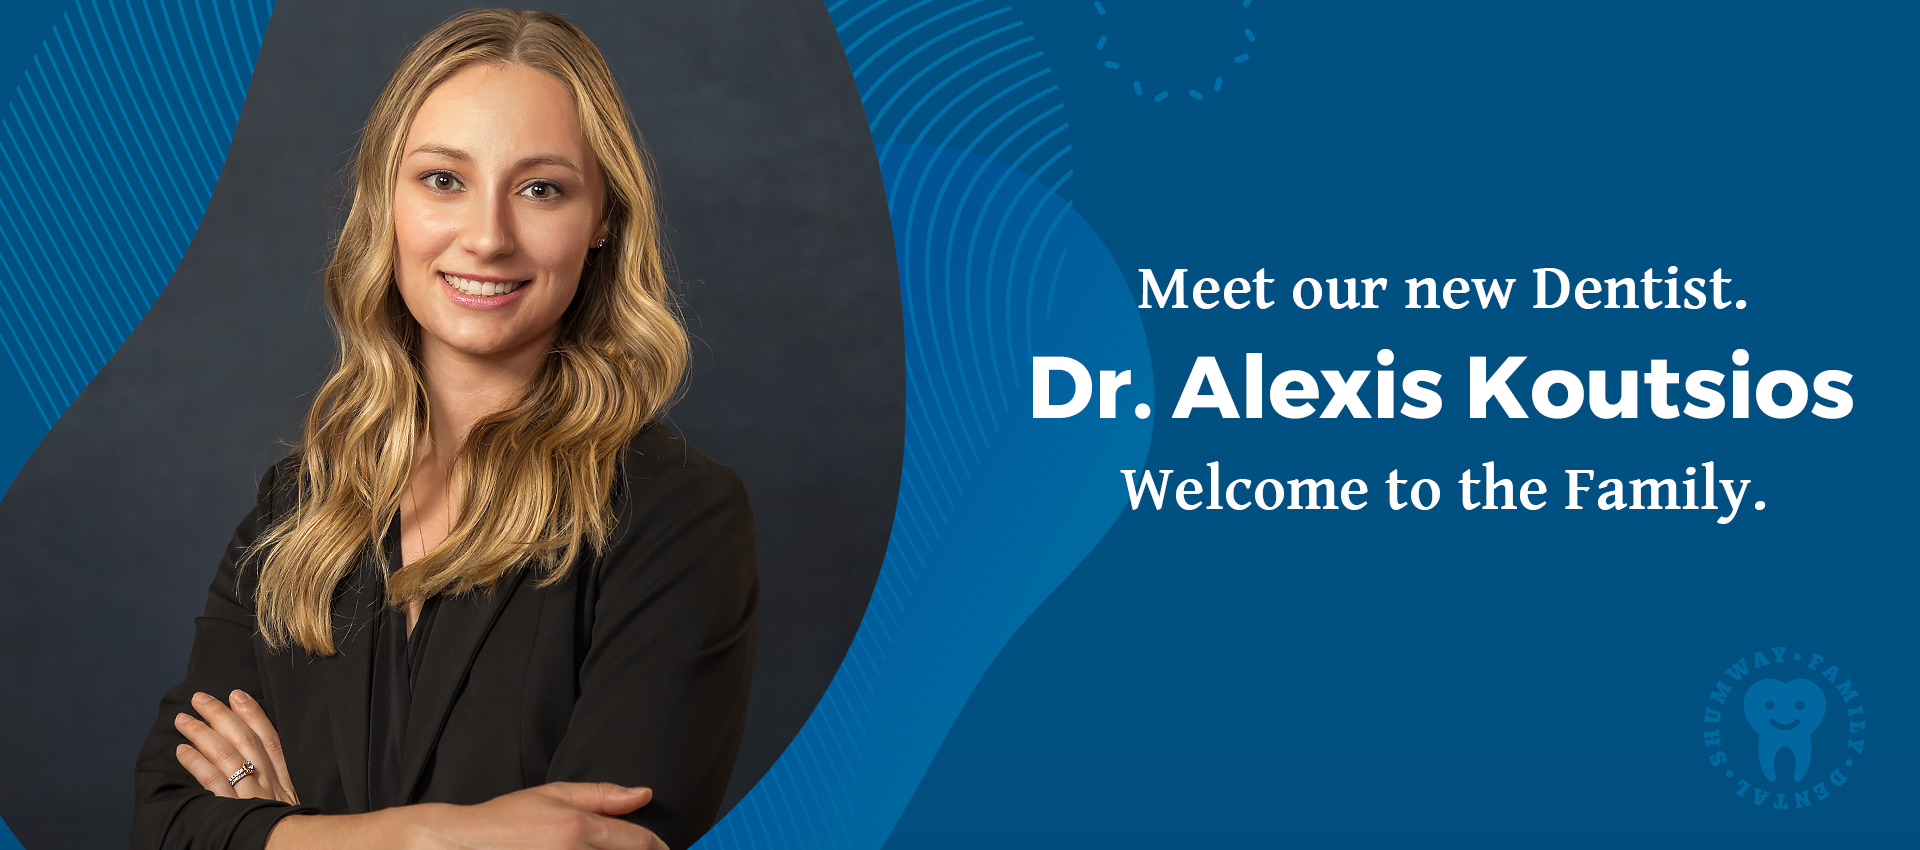 meet our new dentist, Dr. Alexis Koutsios. Welcome to the family.